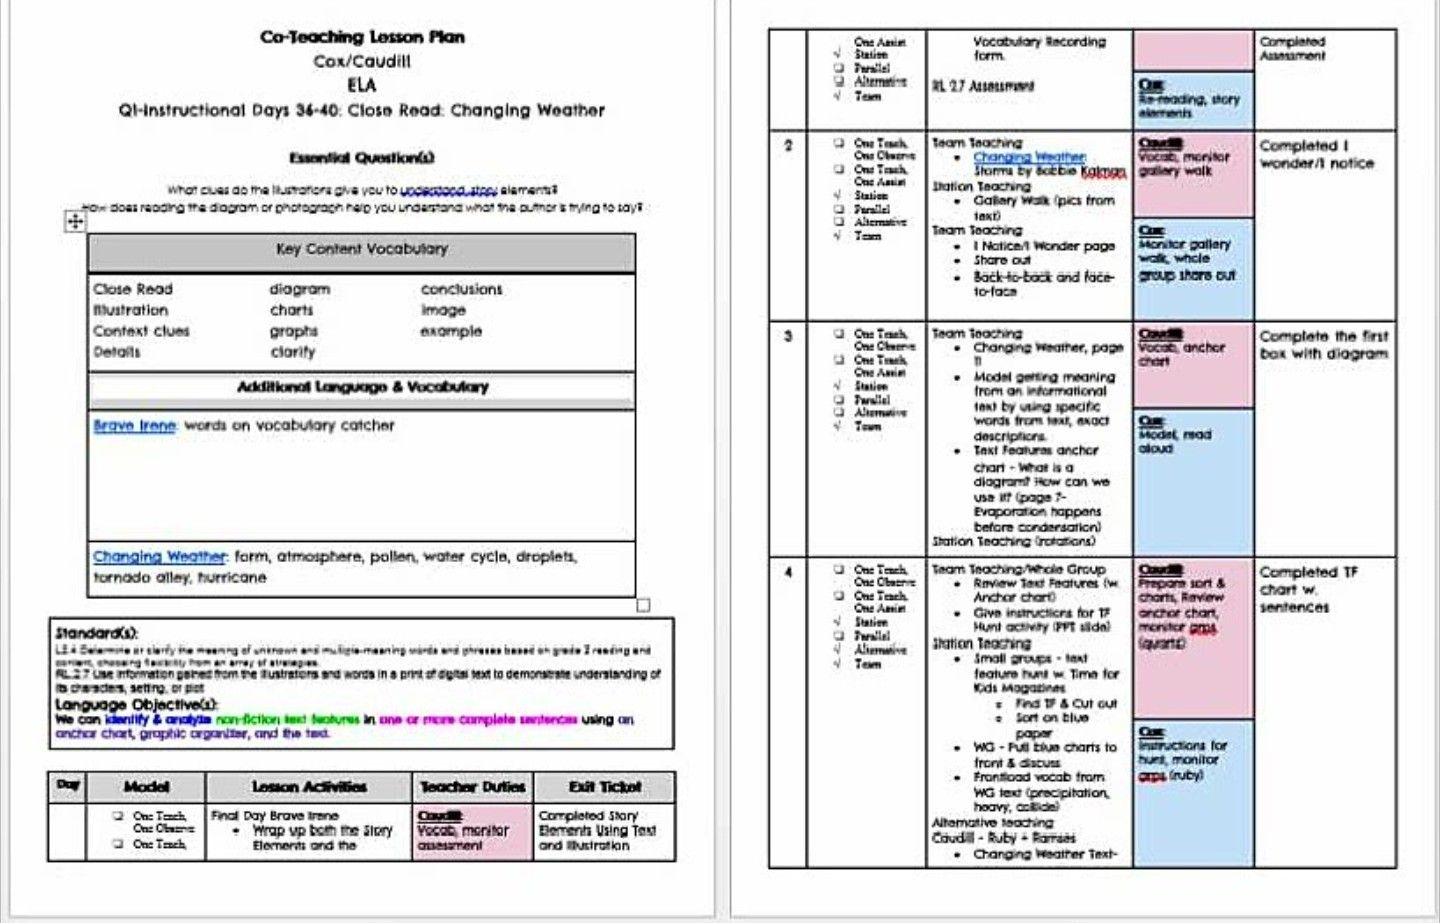 Comprehensive Co-Teaching Lesson Plan Template From Ready